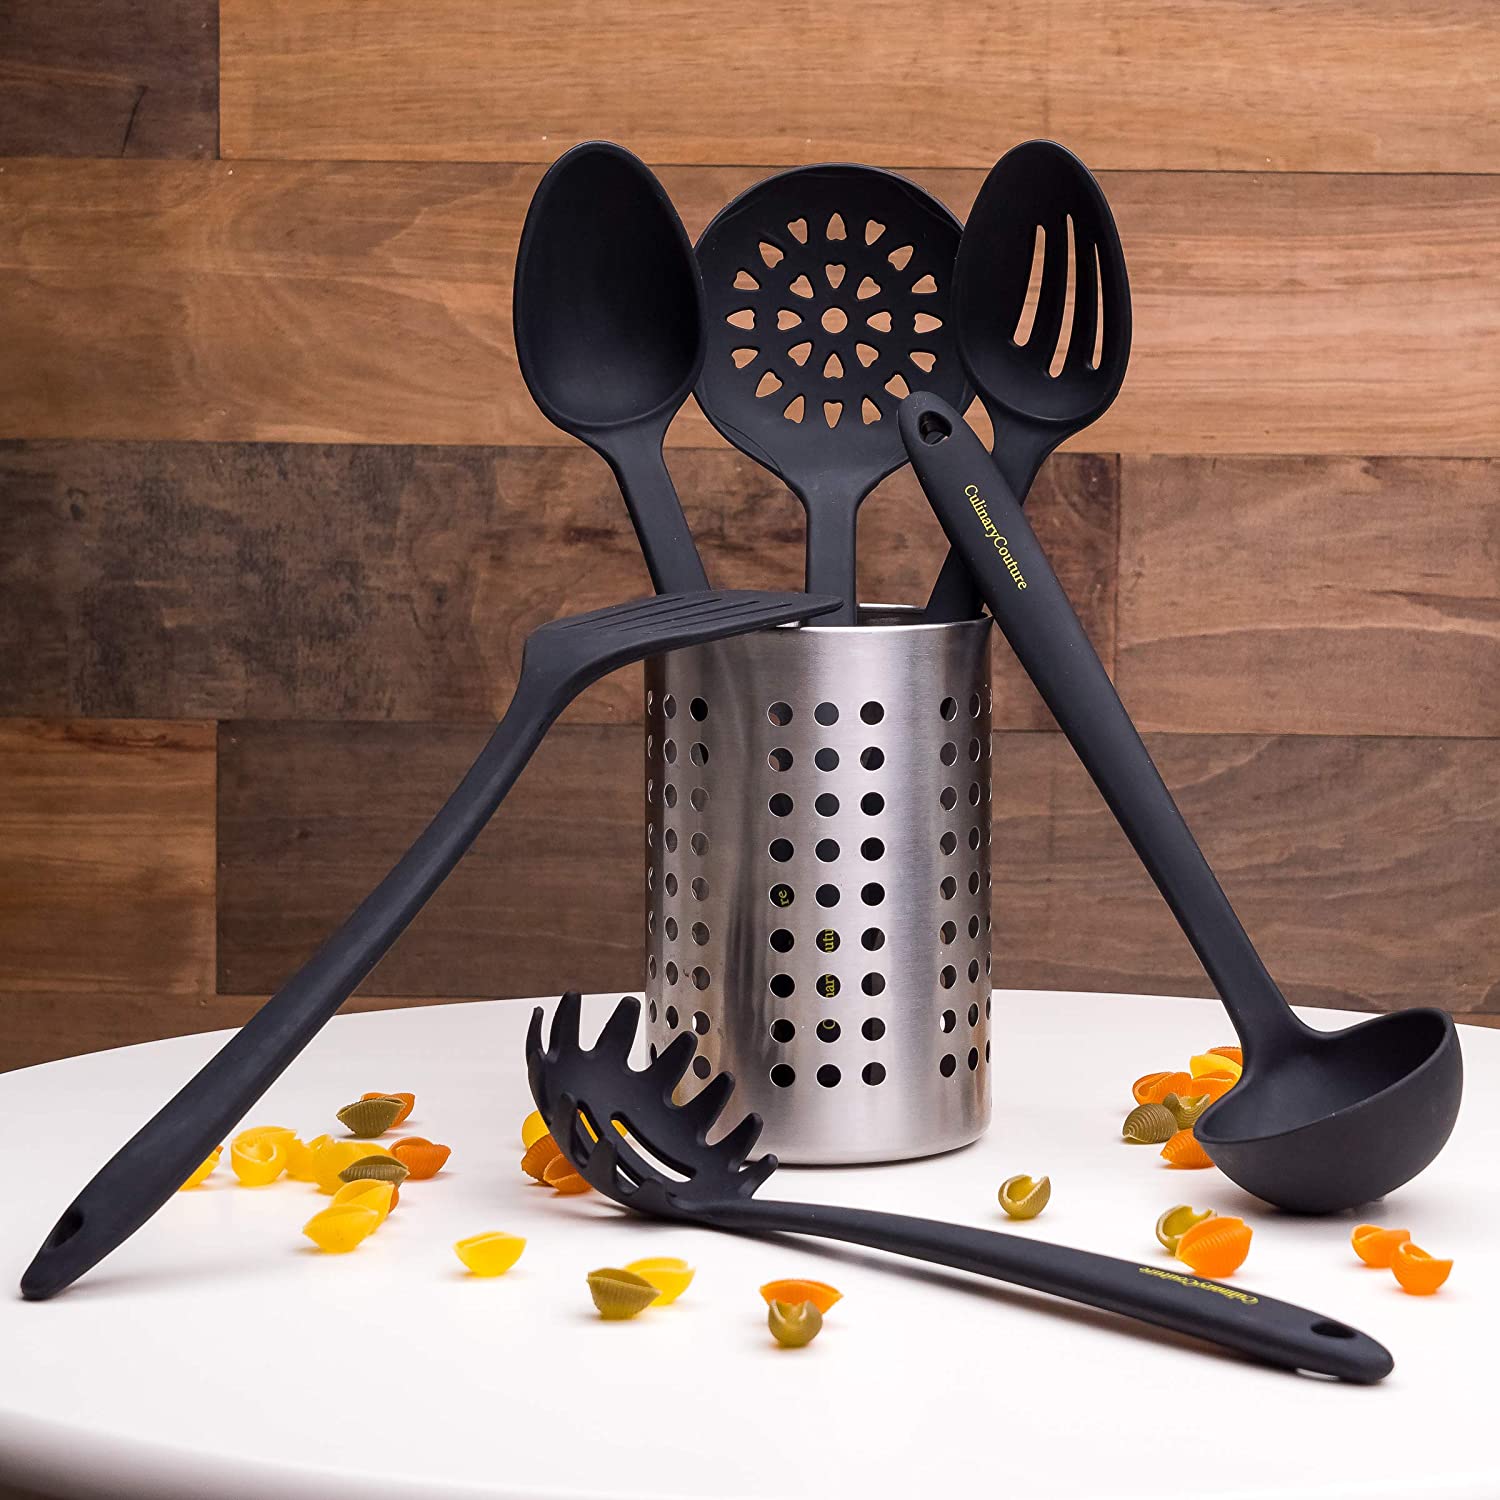 Stainless Steel Silicone Cooking Utensils Set - Heat Resistant + Ebook –  Culinary Couture Life